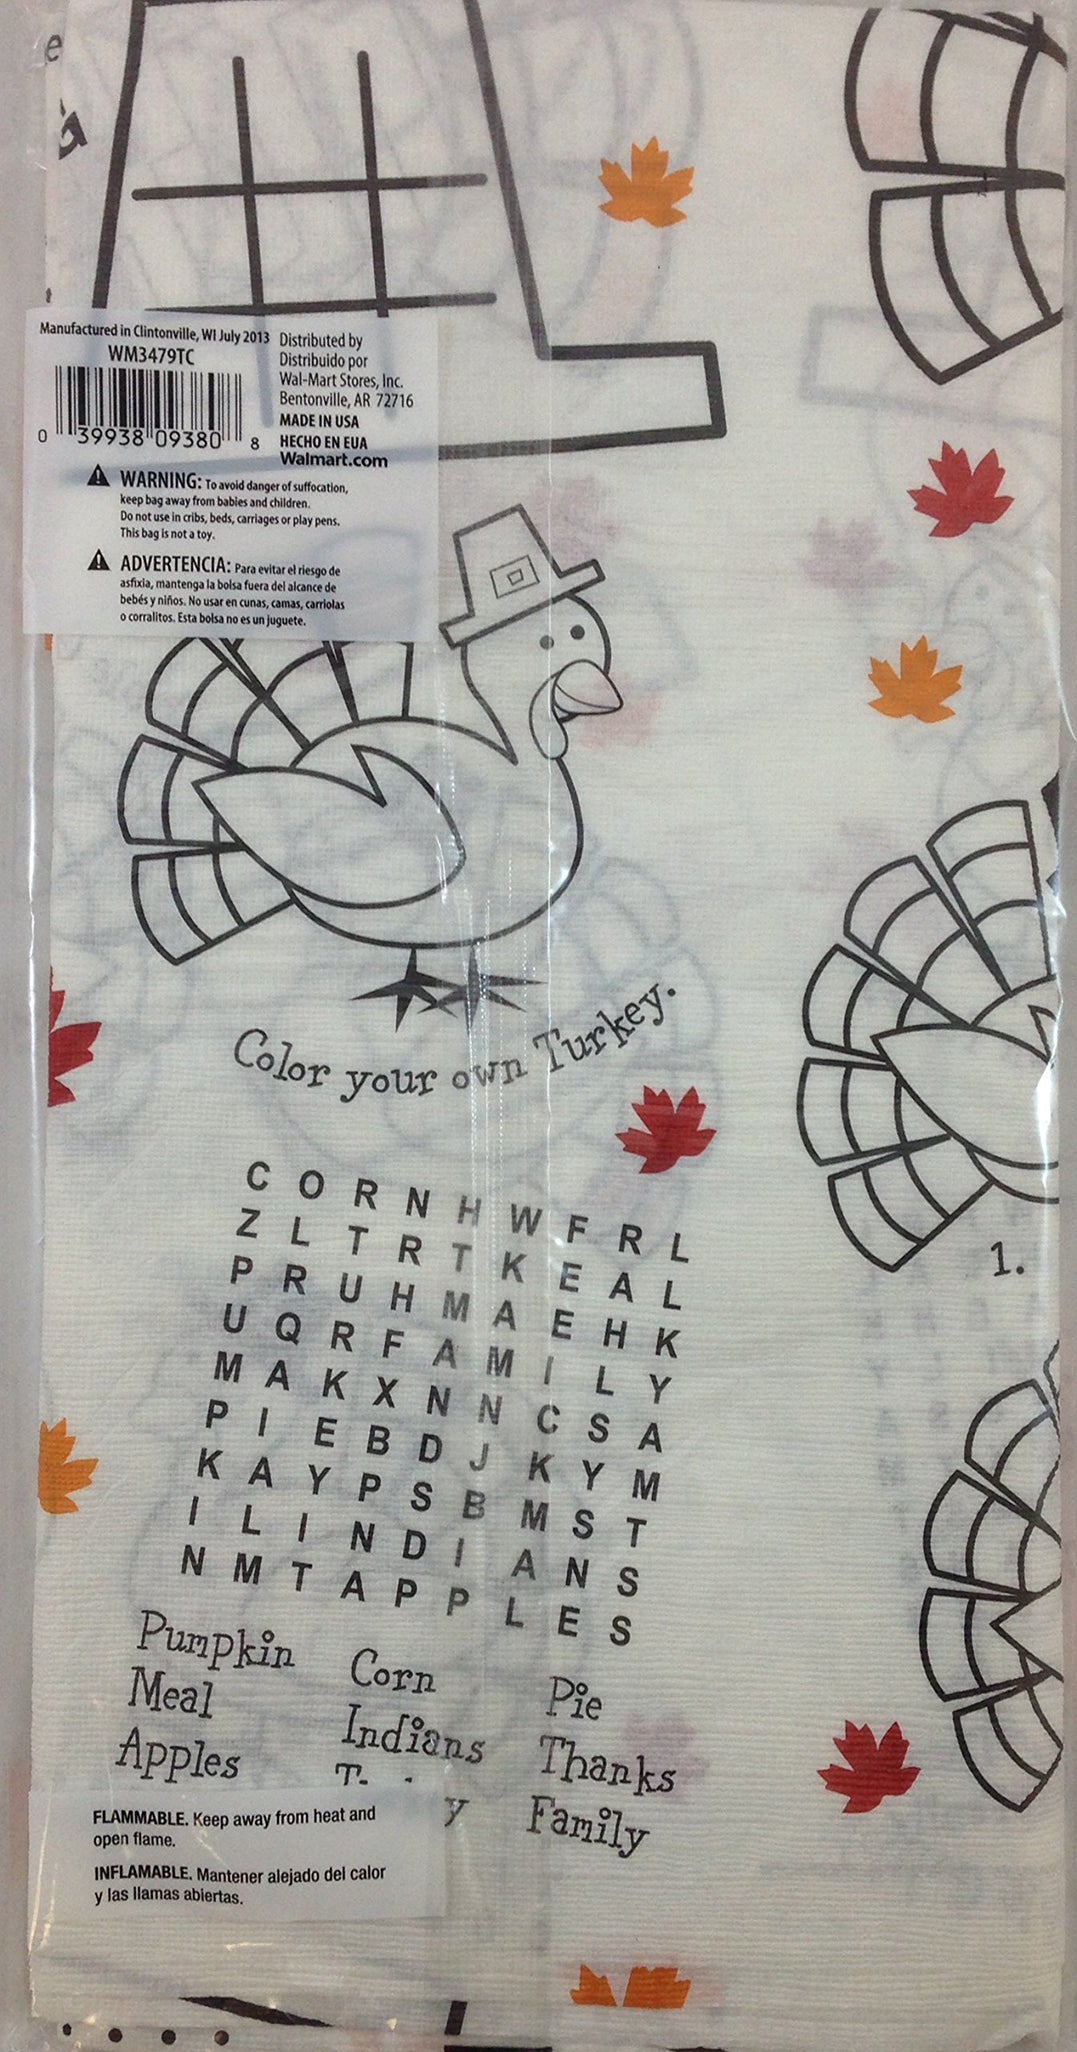 Paper Activity Happy Thanksgiving Tablecover